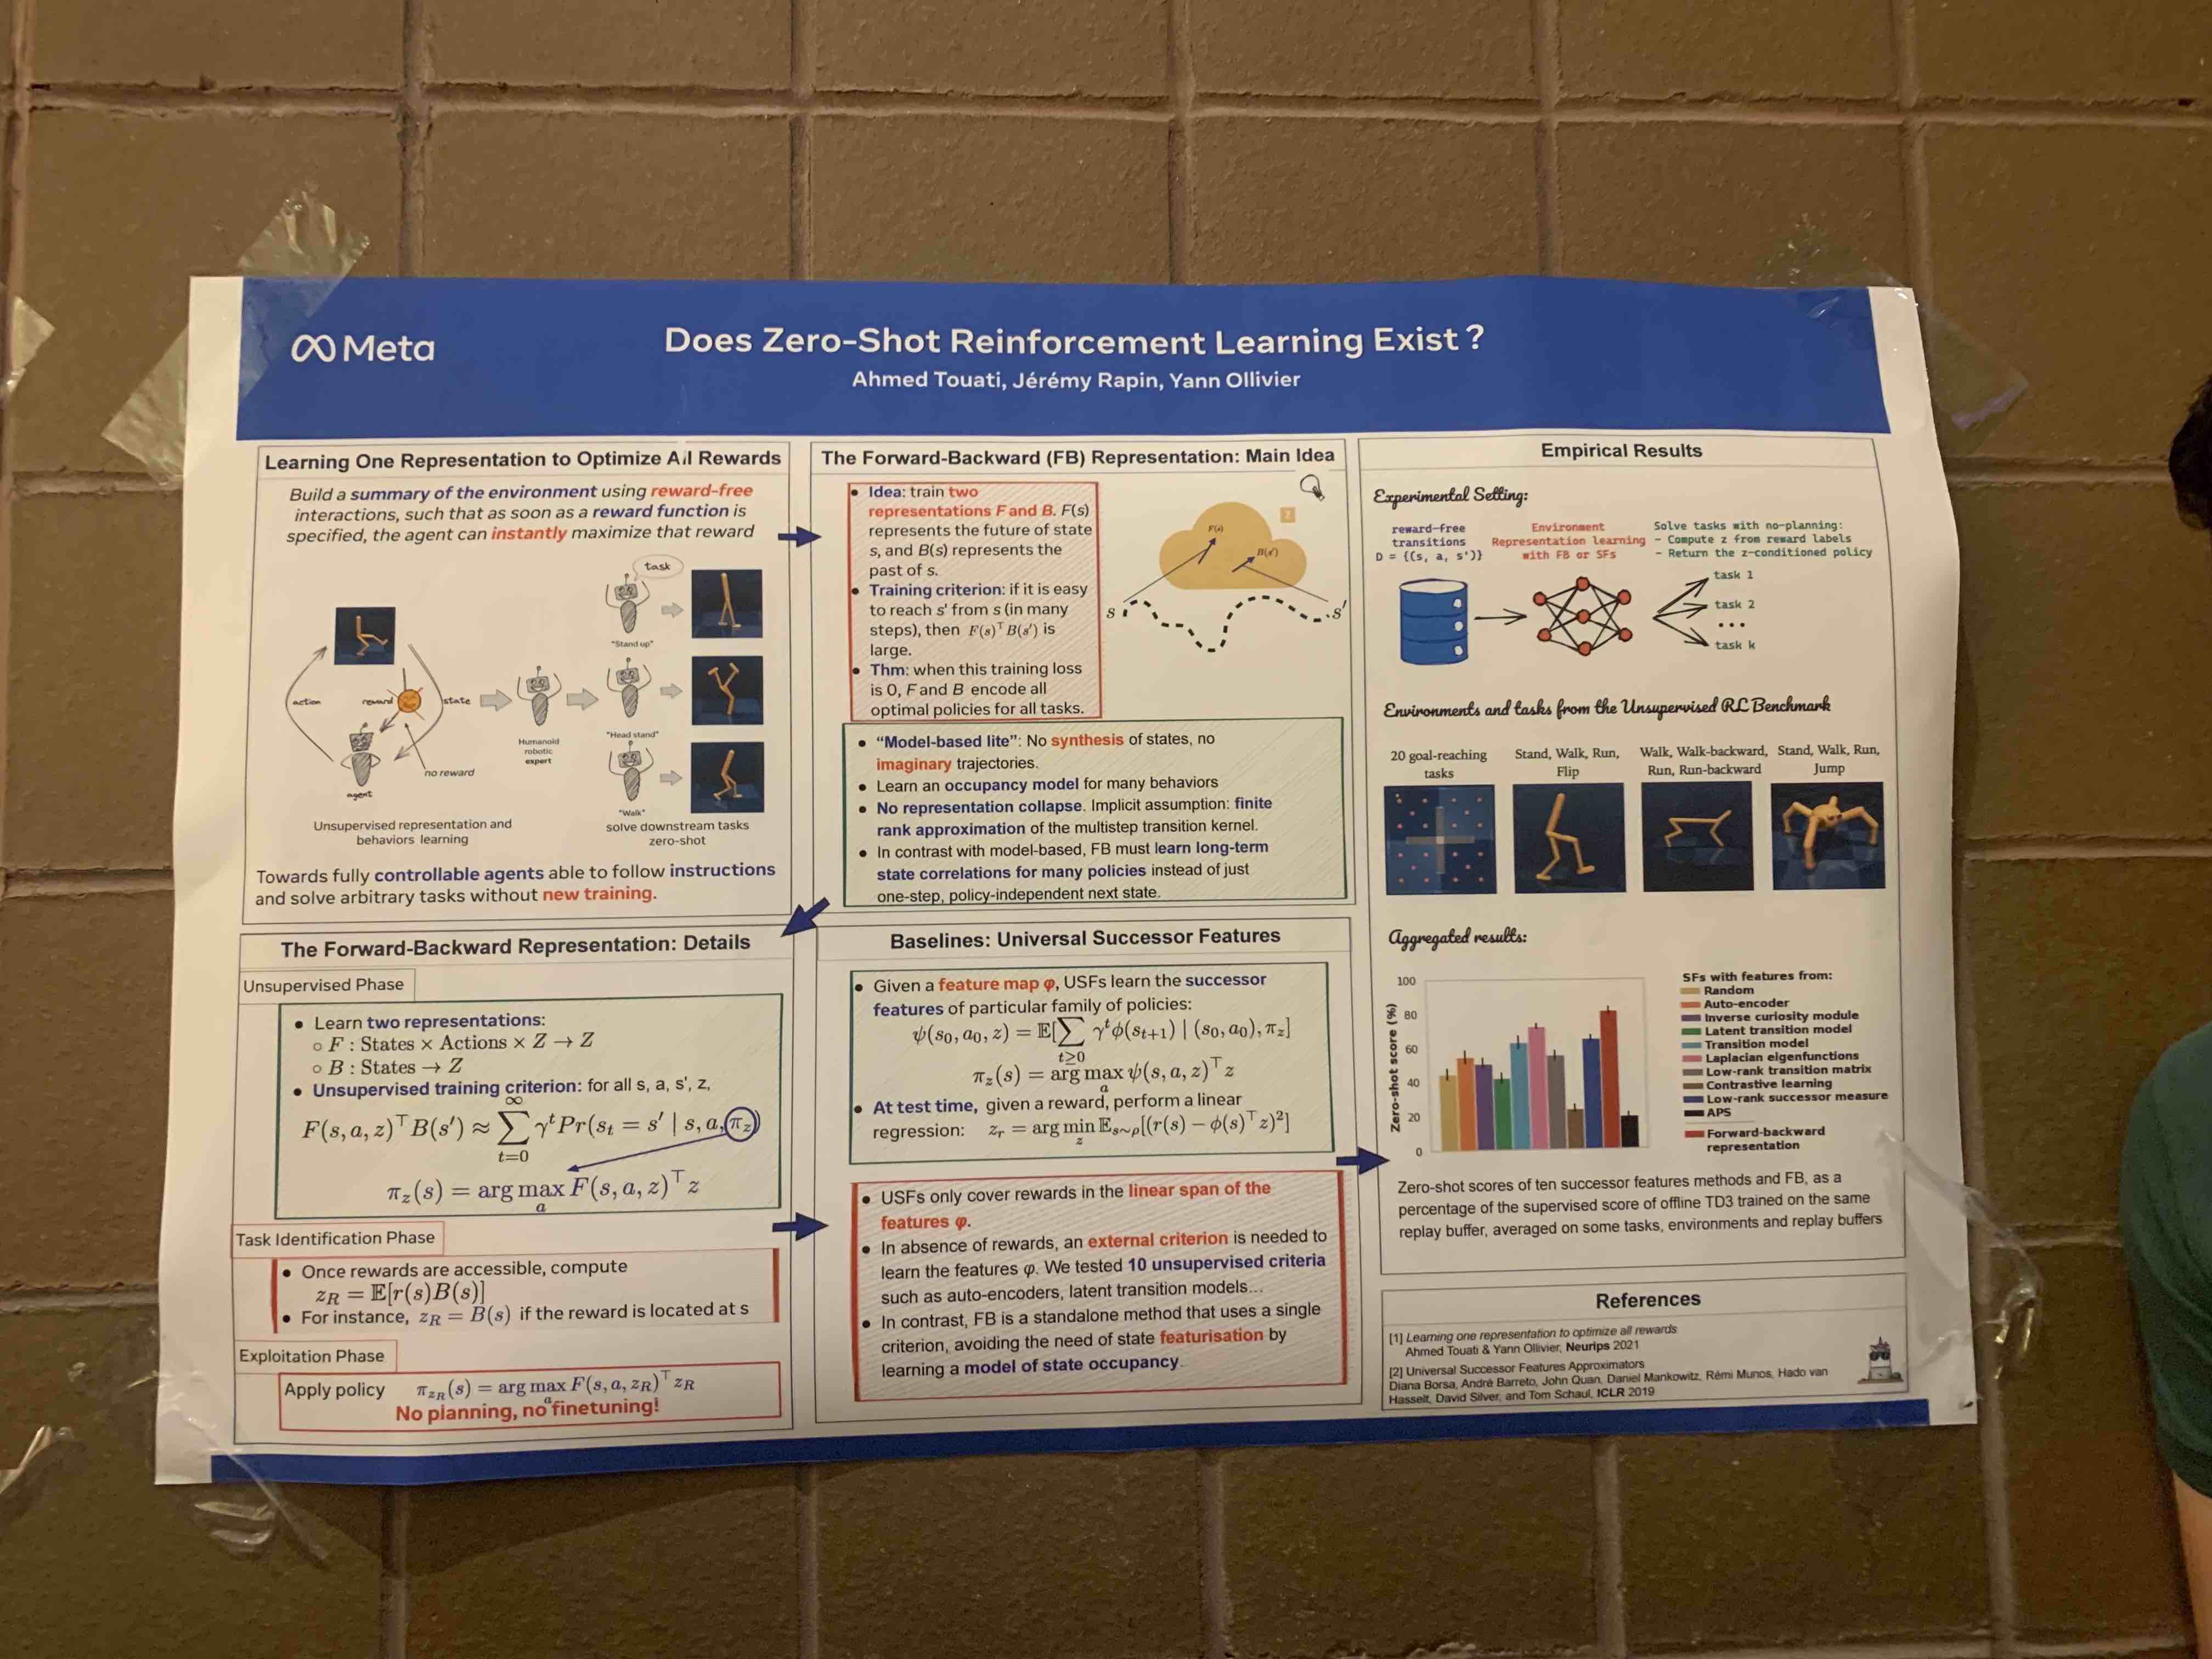 Poster summarising talk from Touati et al, 2022 at NeurIPS: Does zero-shot Reinforcement Learning Exist?